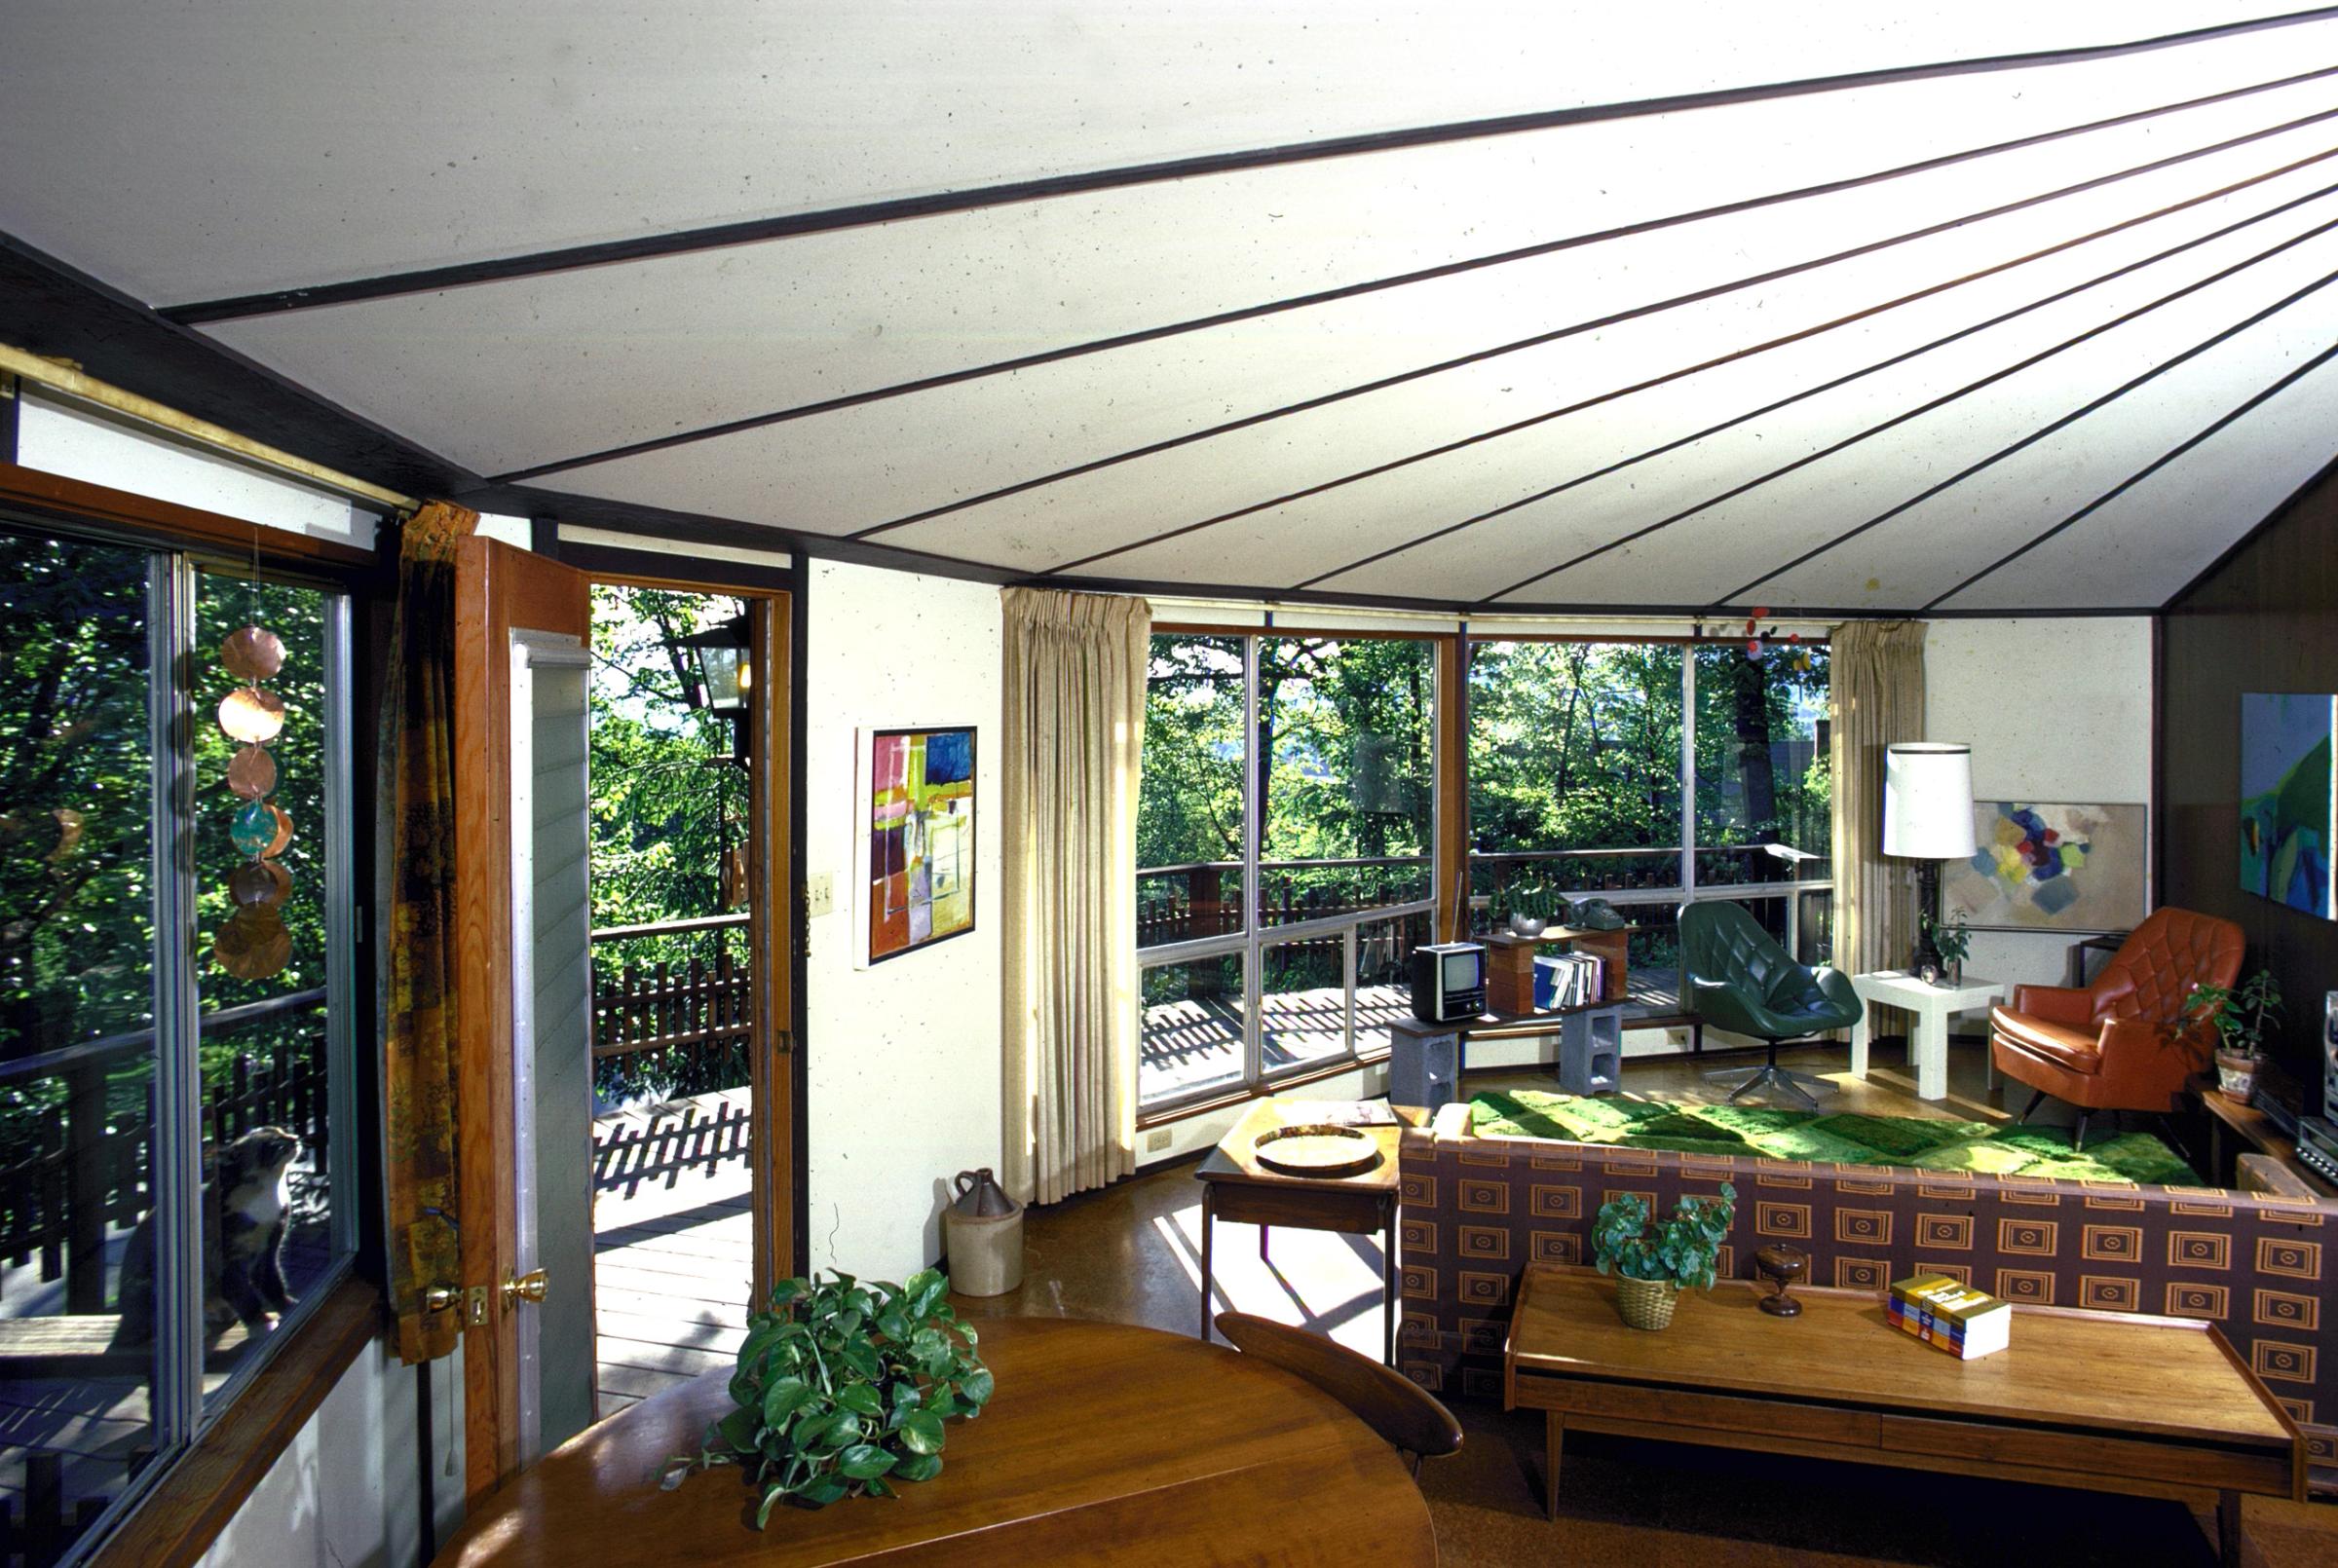 Prefab Vacation homes from 1970